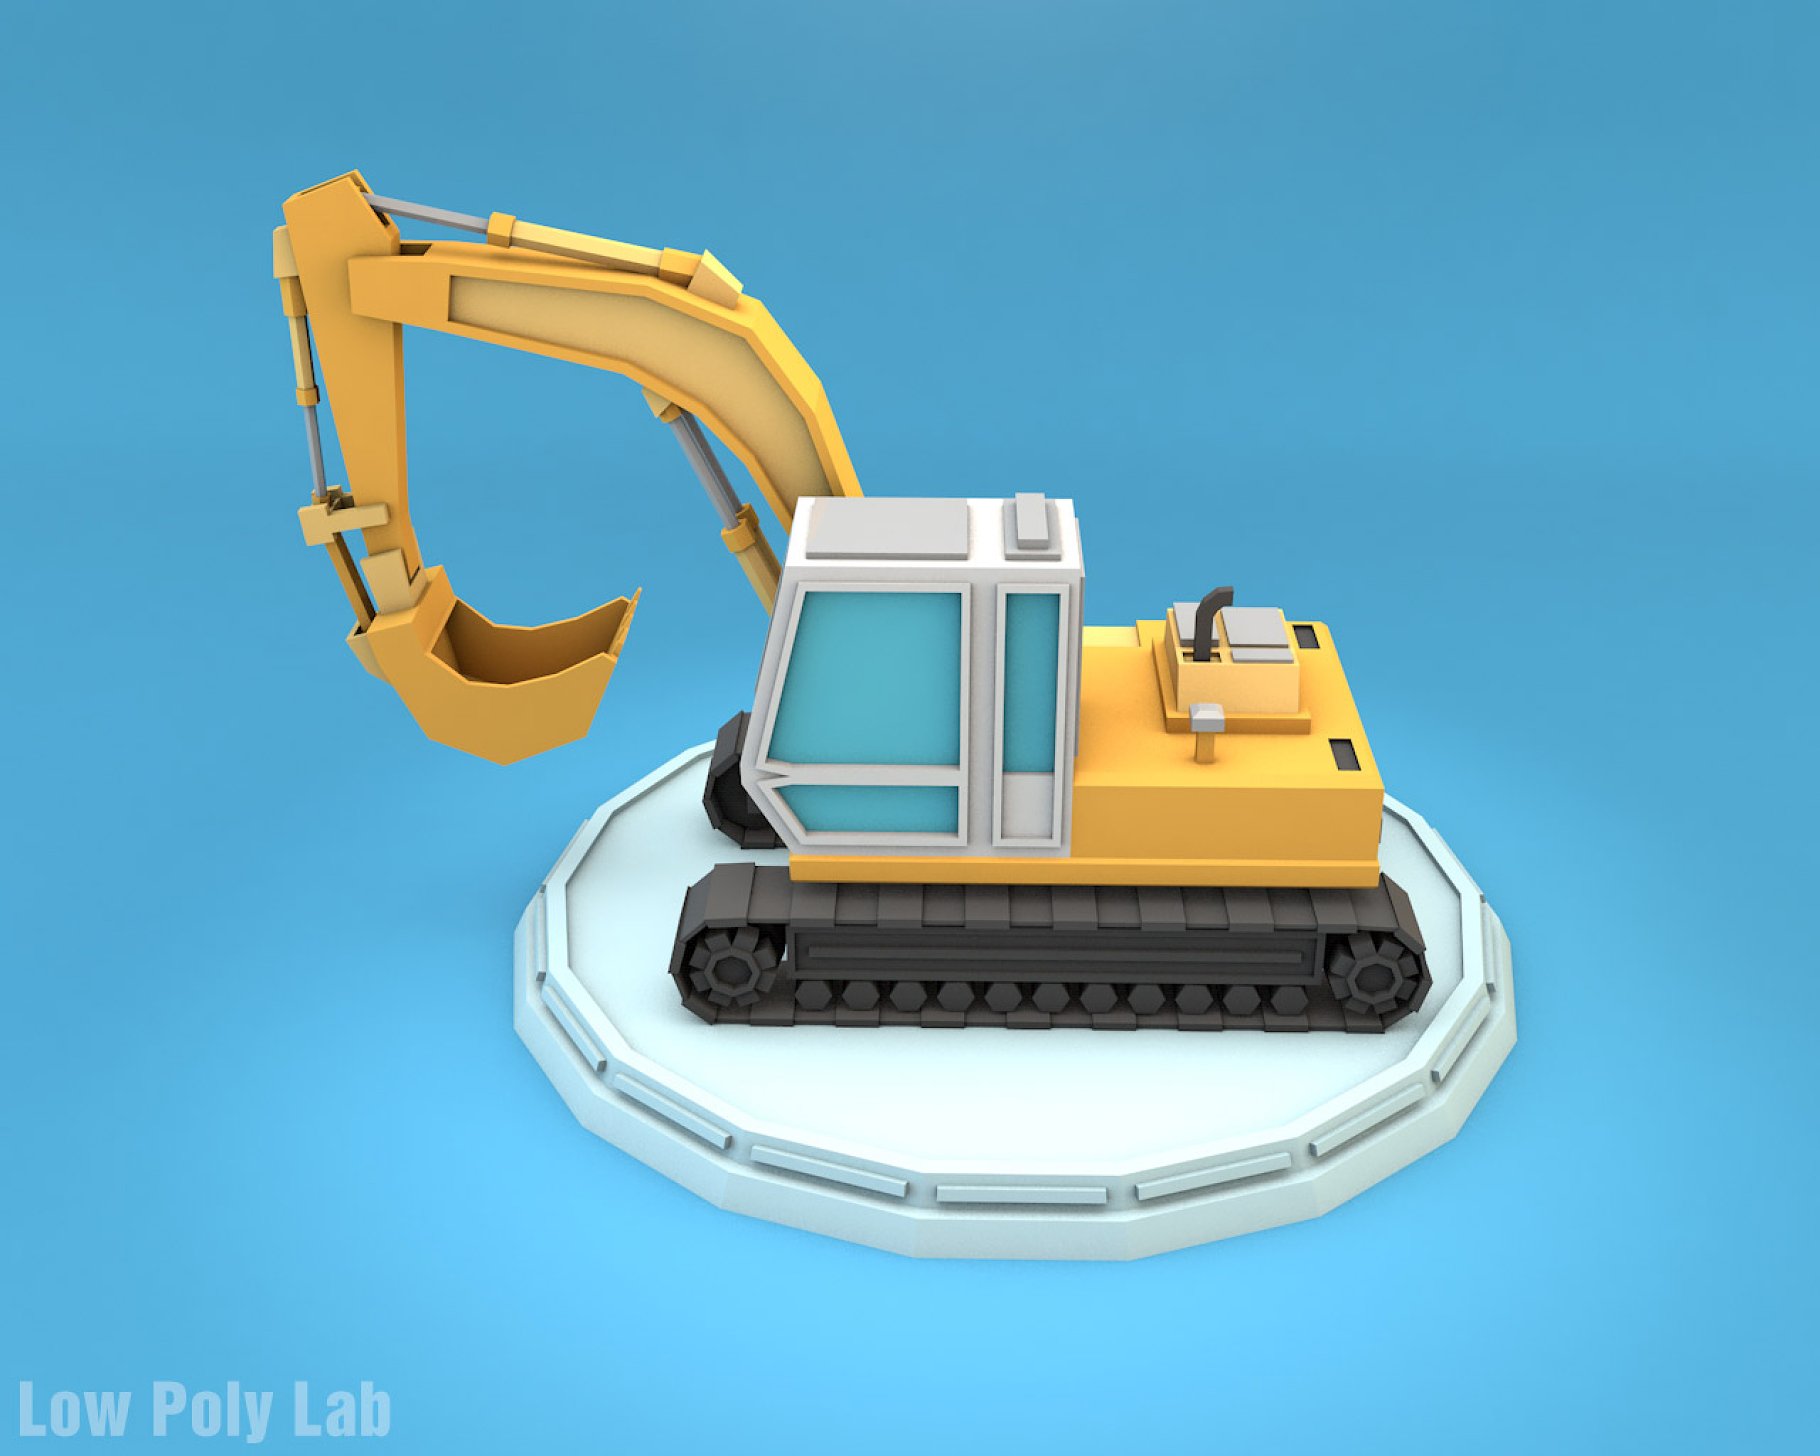 Low poly excavator mockup in left on a blue background.